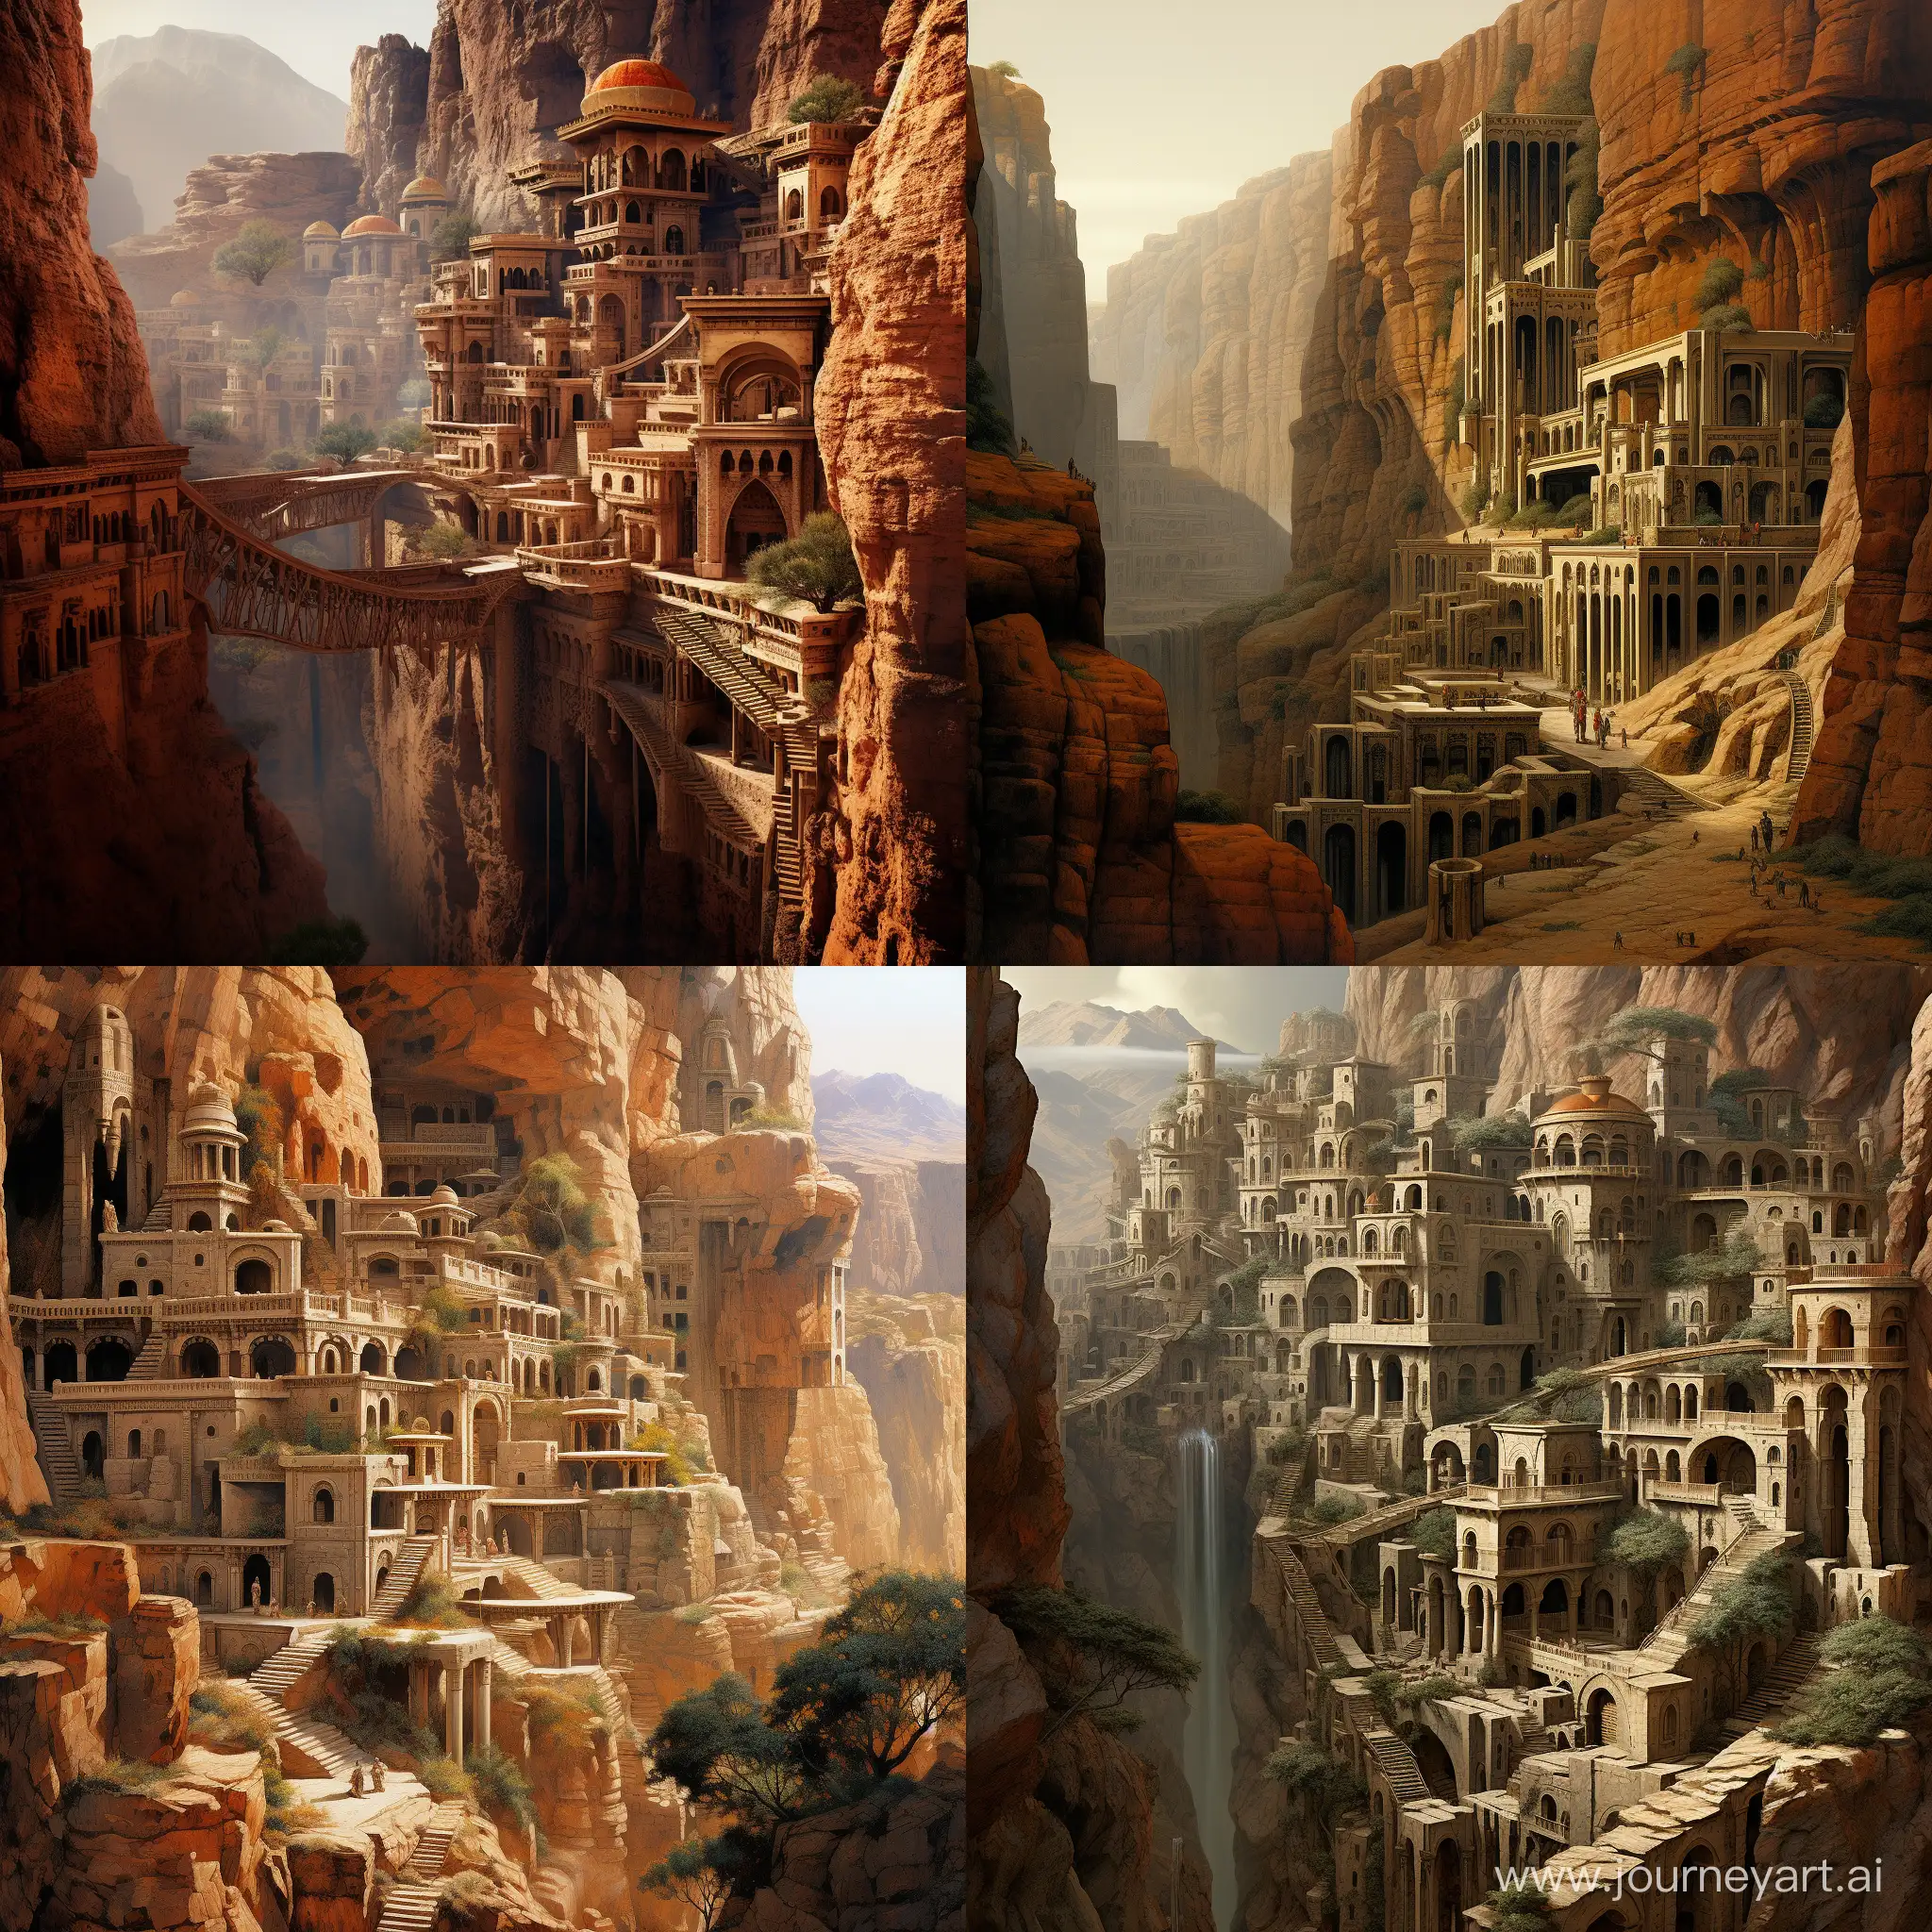 Majestic-Desert-Cliff-with-Exquisite-City-Architectural-Carvings